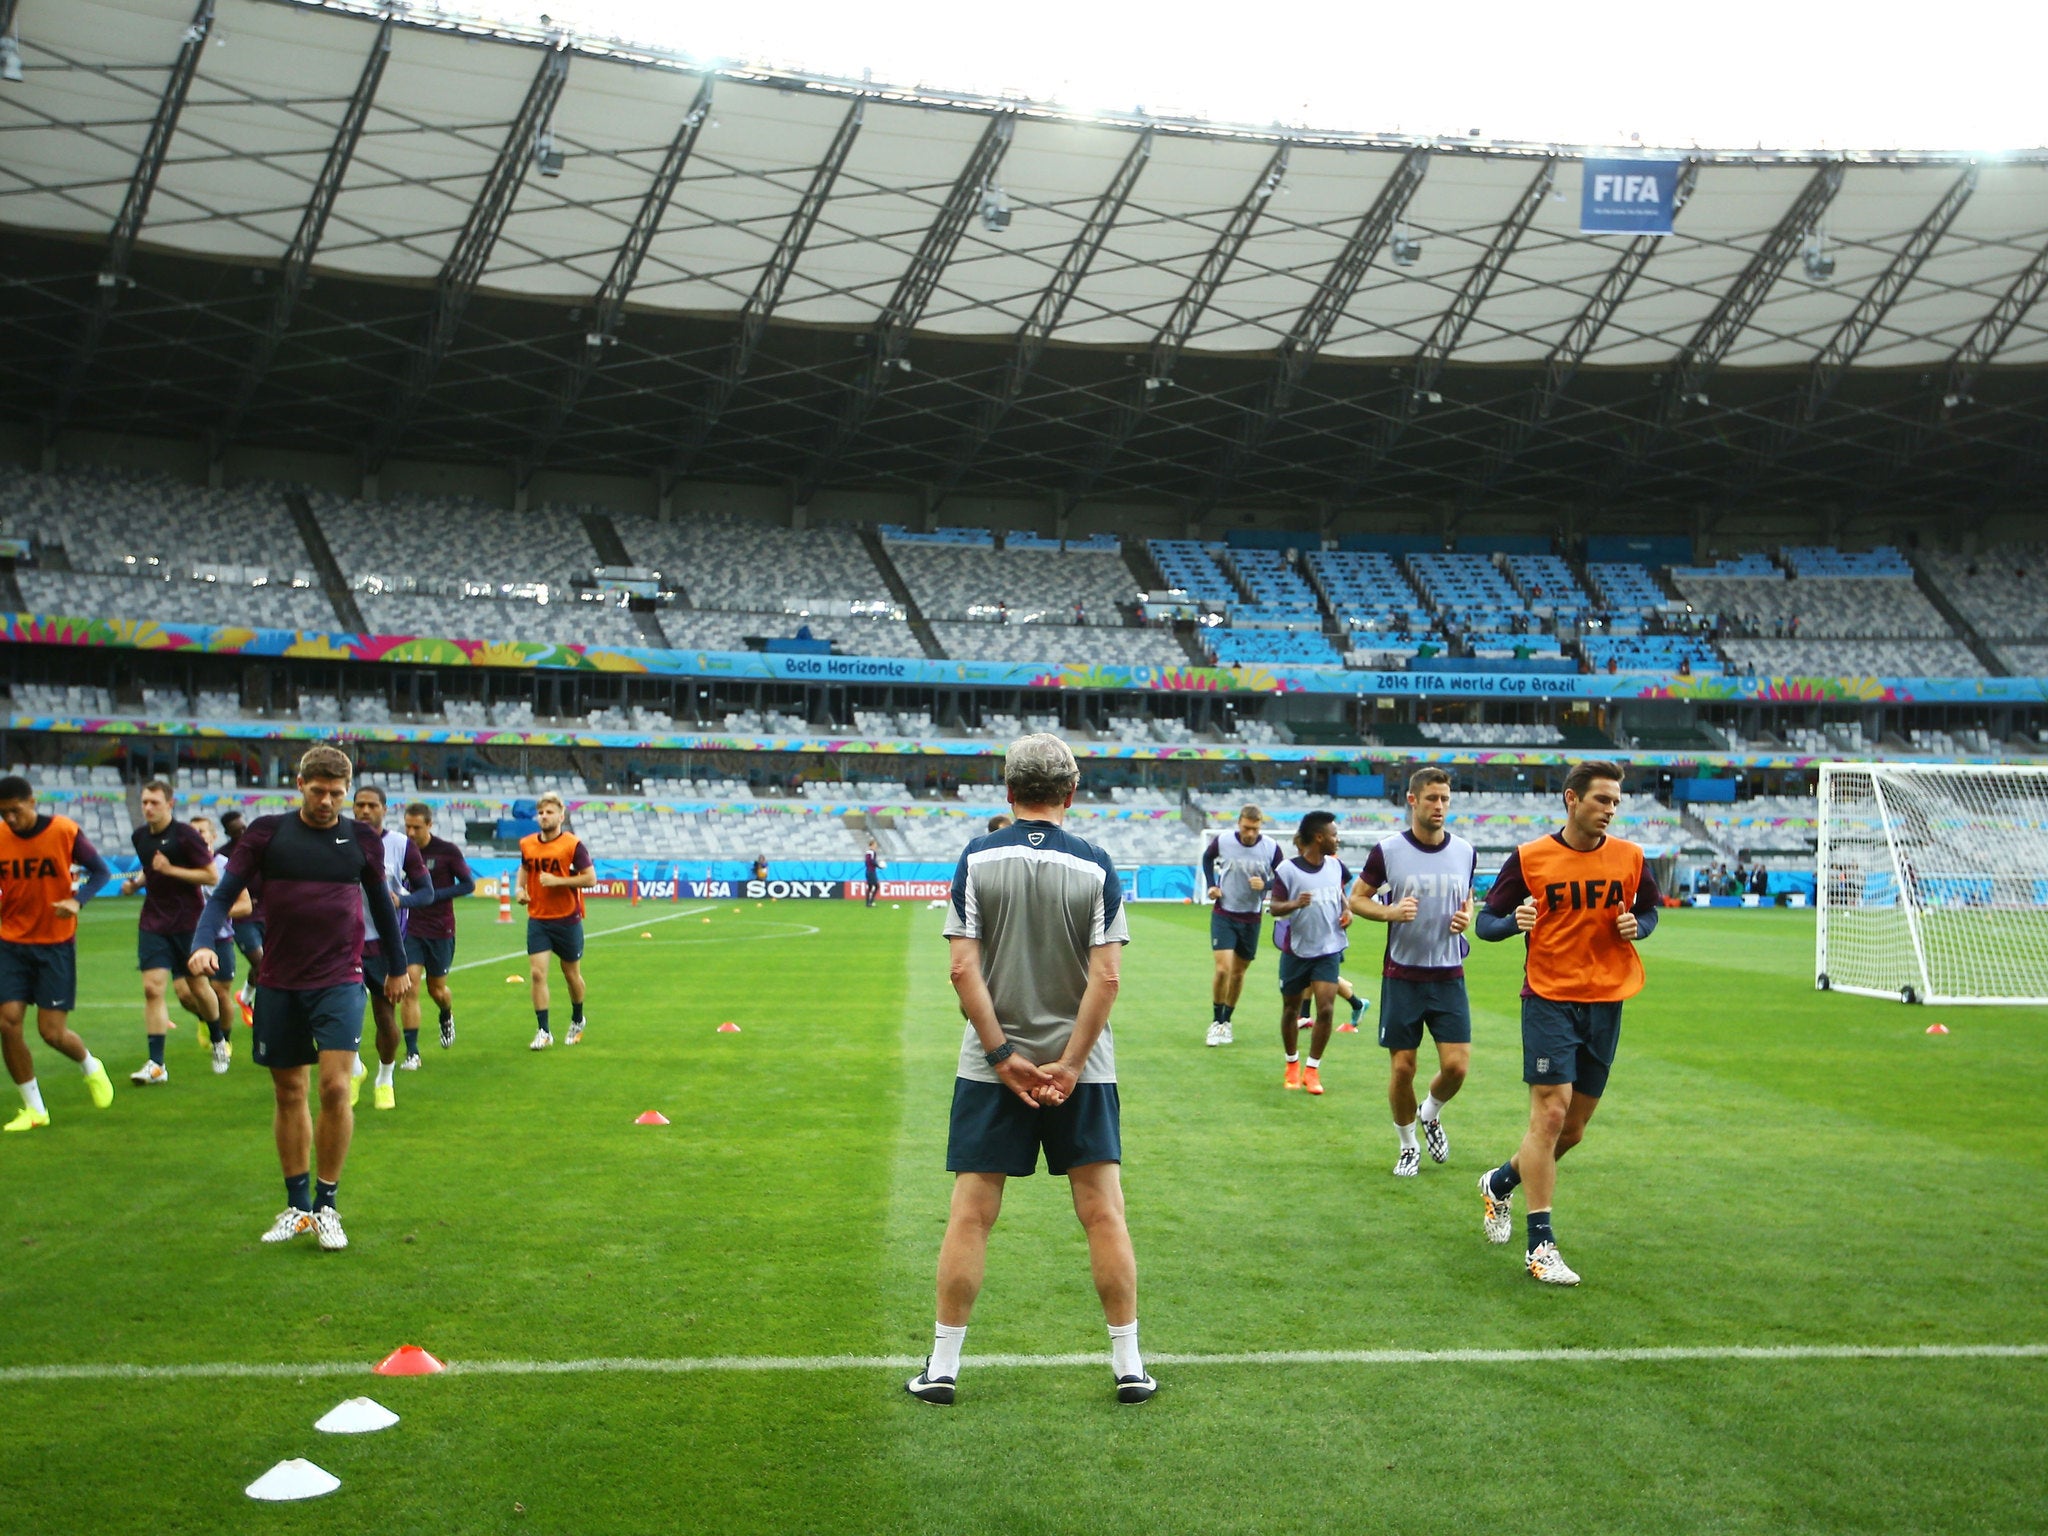 England manager Roy Hodgson looks on as his players run drills during an England training session ahead of the 2014 FIFA World Cup Brazil Group D match against Costa Rica at Estadio Mineirao in Belo Horizonte, Brazil.